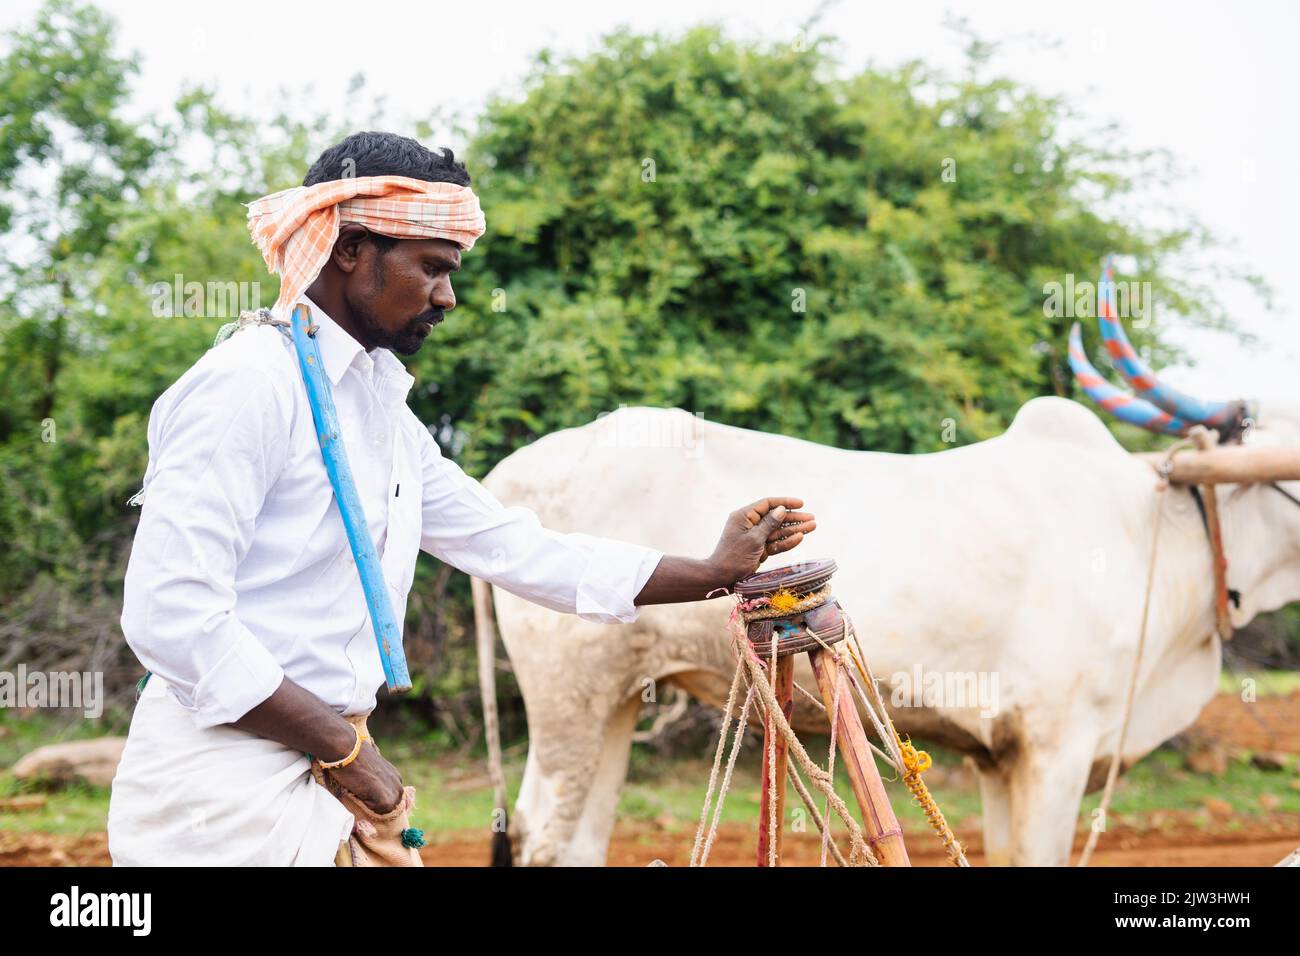 Indian farmer petting calf by rubbing head at farmland - concept of caring, farming and rural agriculture Stock Photo